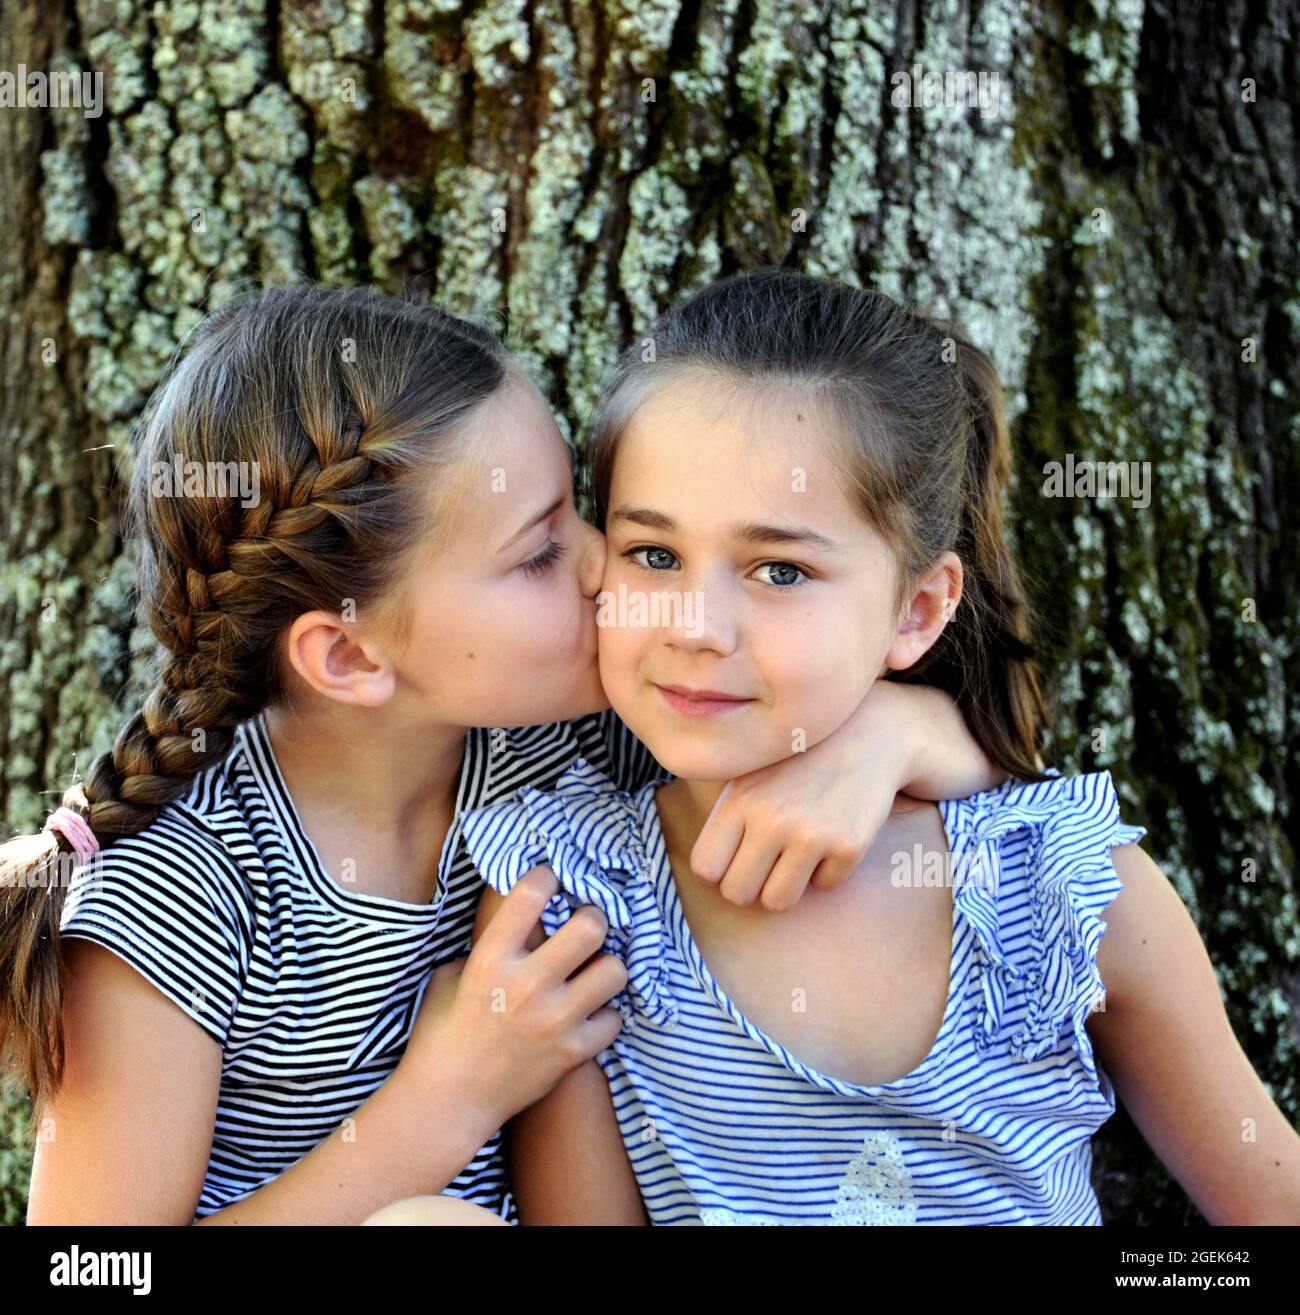 Two sisters sit outside besides a tree.  One sister kisses the other on the cheek.  They both have on striped shirts. Stock Photo